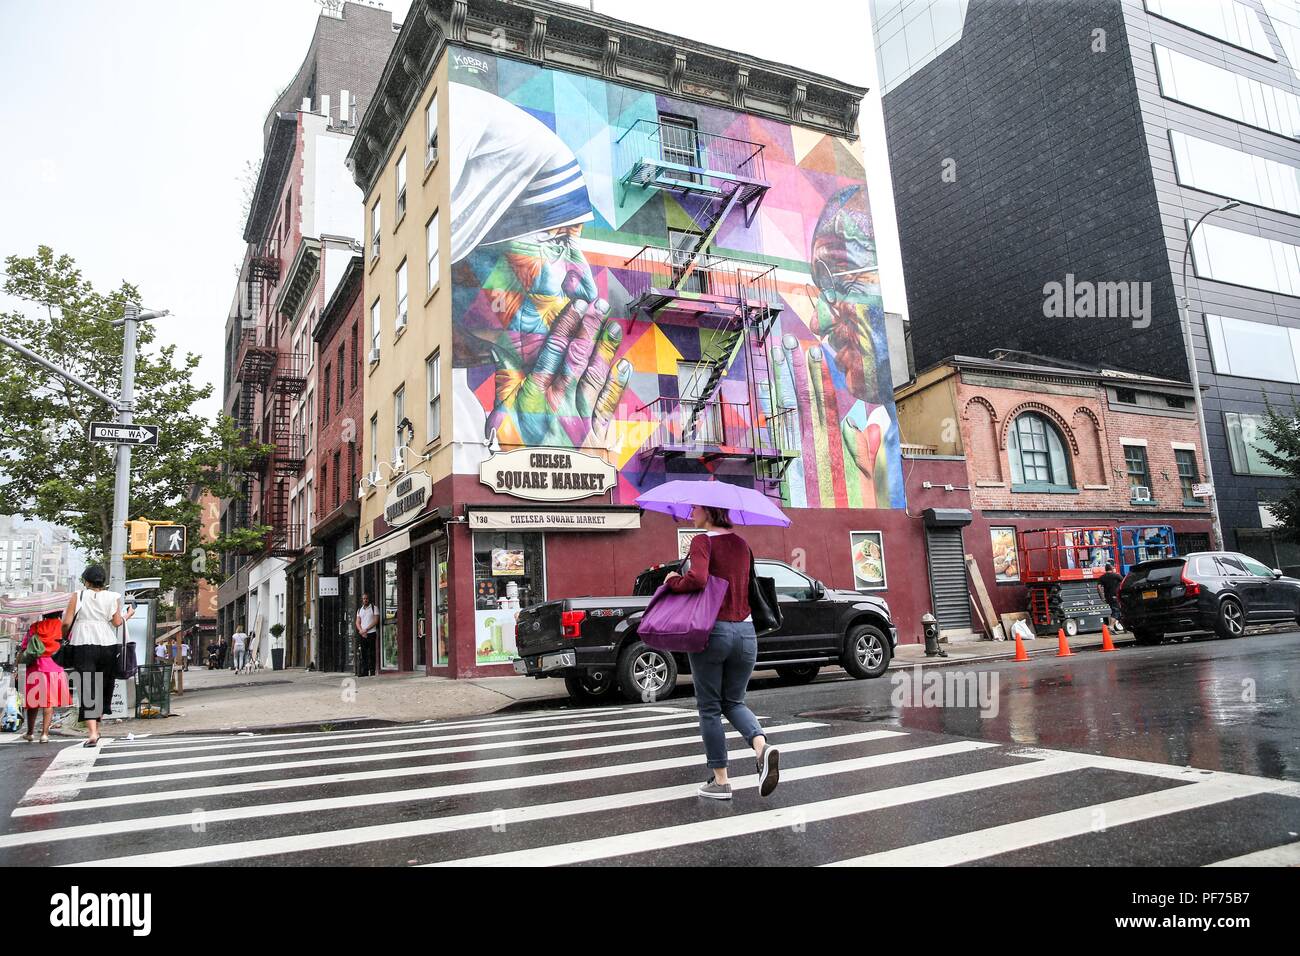 New York, USA. 20th August 2018. Madre Teresa of Calcutta and Mahatma Gandhi's work by the muralist Eduardo Kobra on the 'Colors for Freedom' project is being held in New York City in the United States on Monday. The project plans to spread works around the city. (PHOTO: VANESSA CARVALHO/BRAZIL PHOTO PRESS) Credit: Brazil Photo Press/Alamy Live News Credit: Brazil Photo Press/Alamy Live News Stock Photo